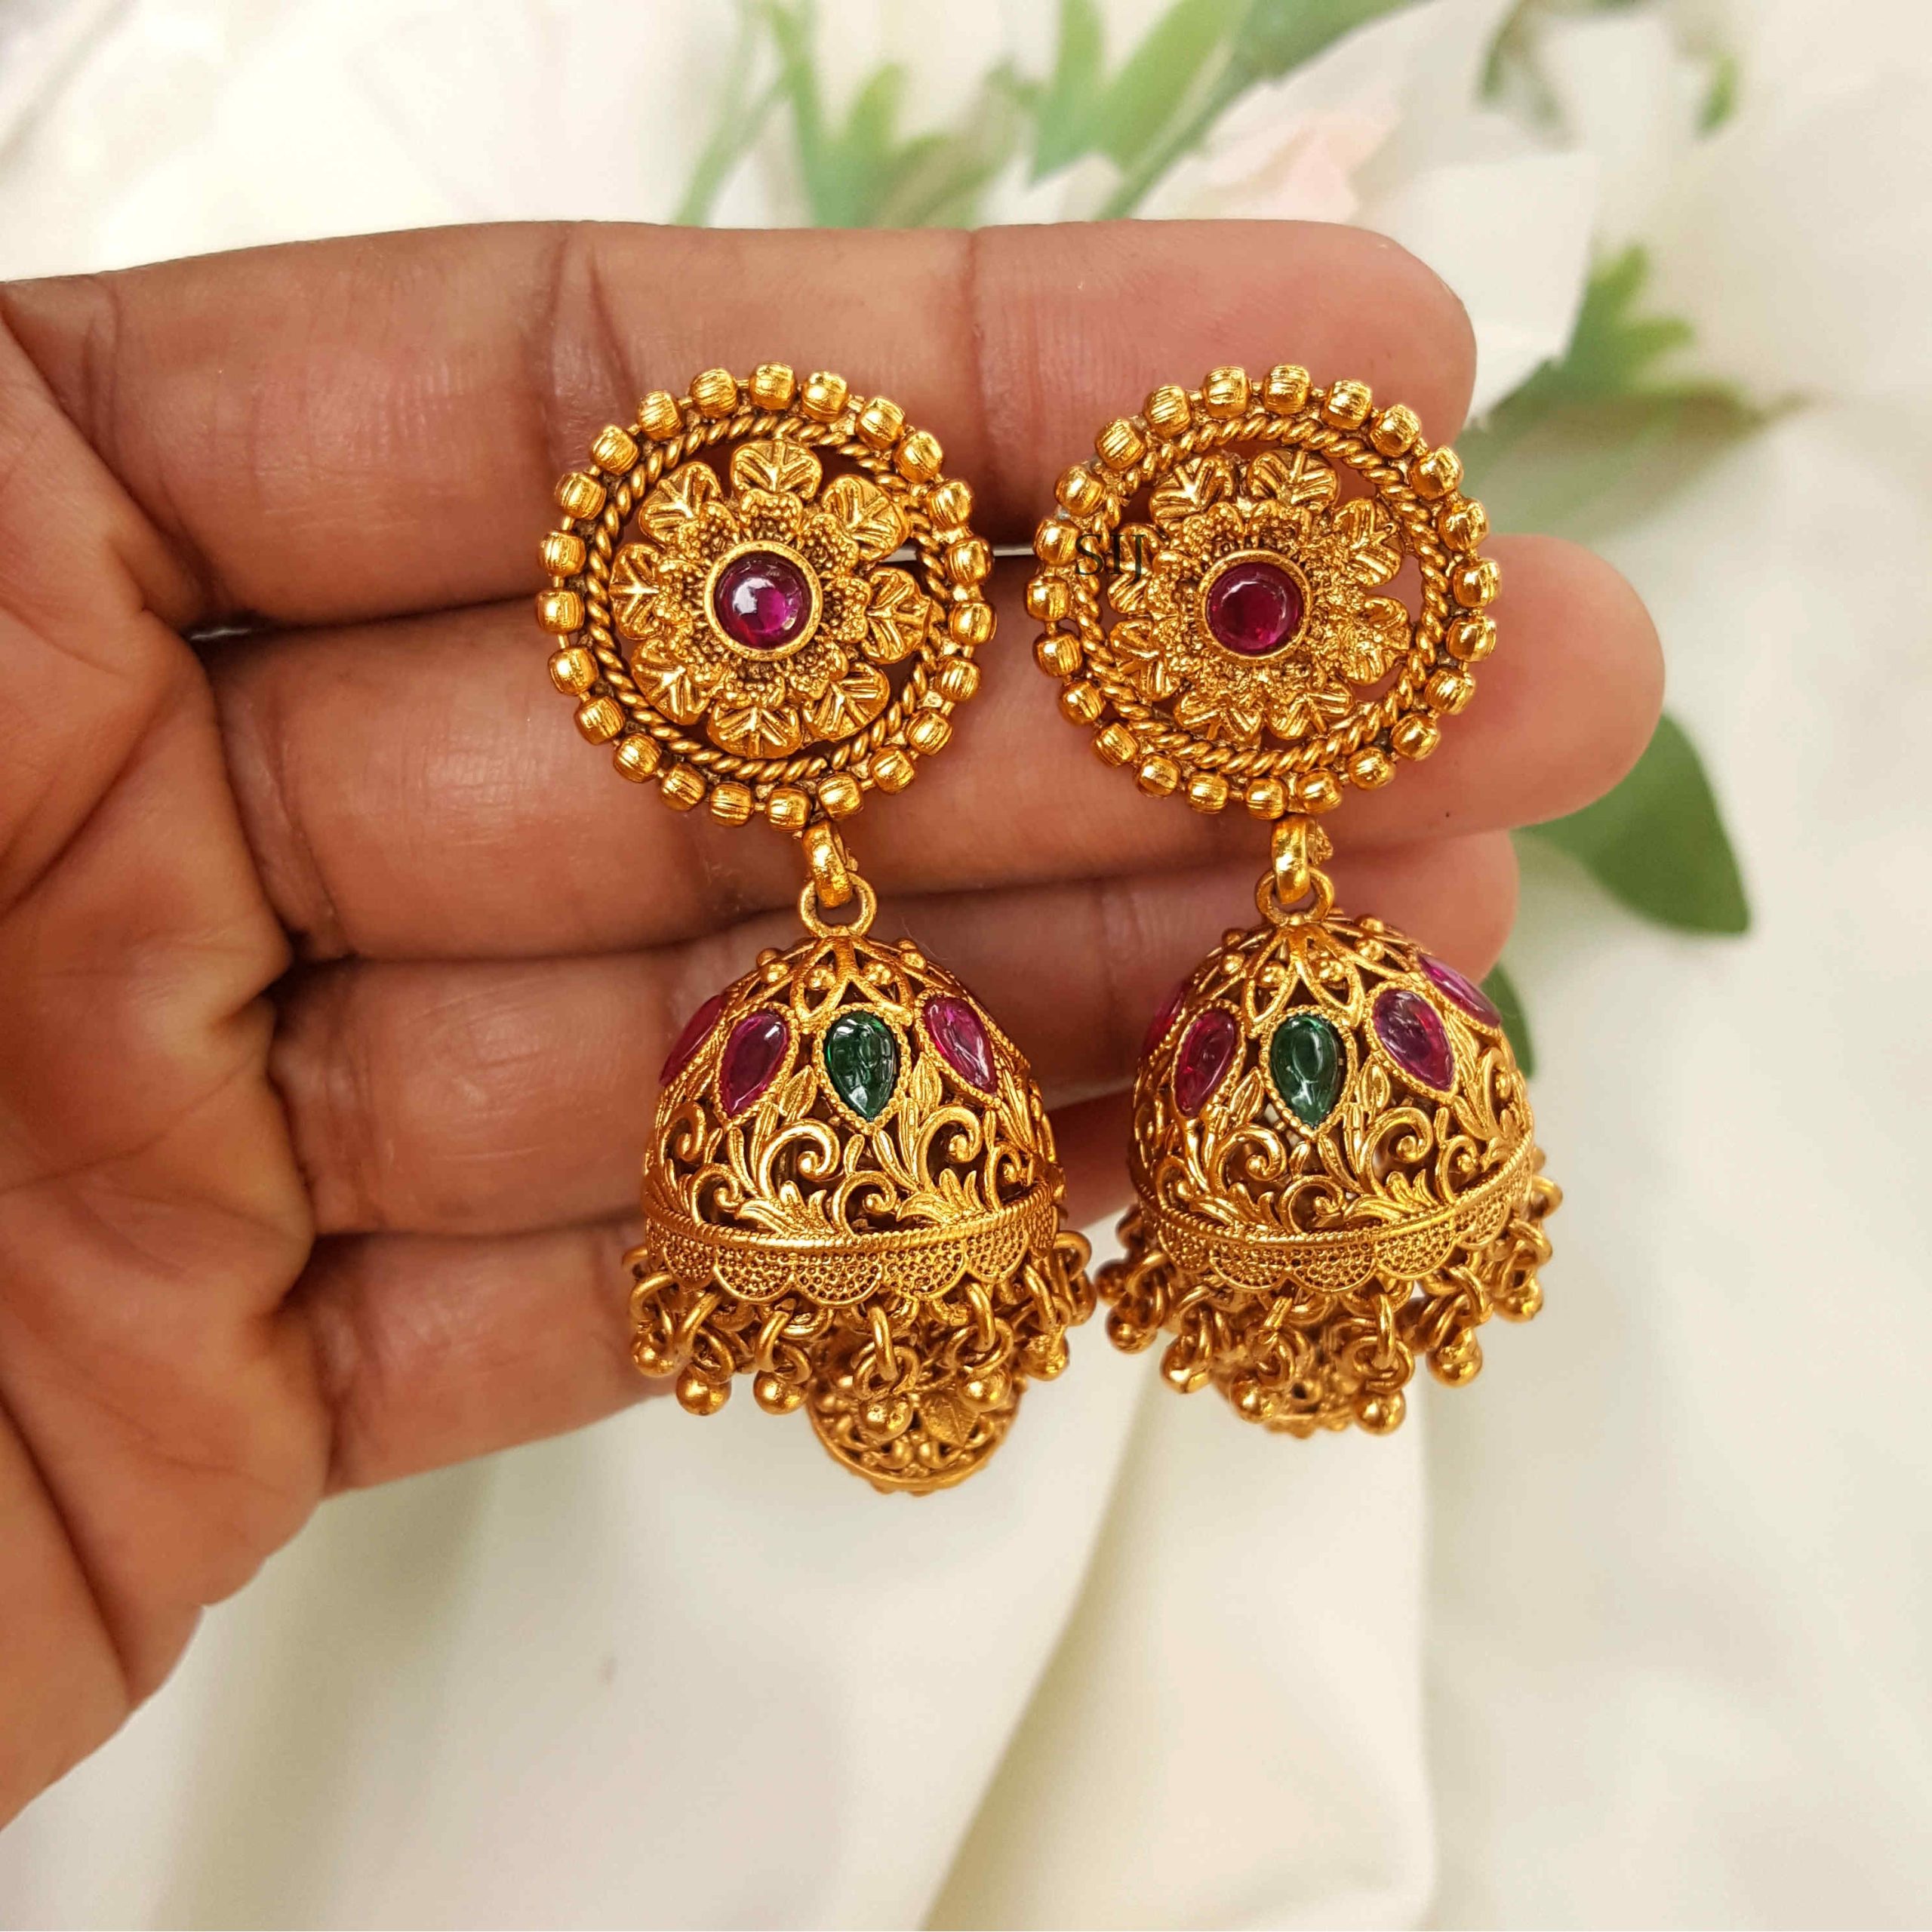 Gorgeous Gold Beads Haram with Floral Designed Pendant